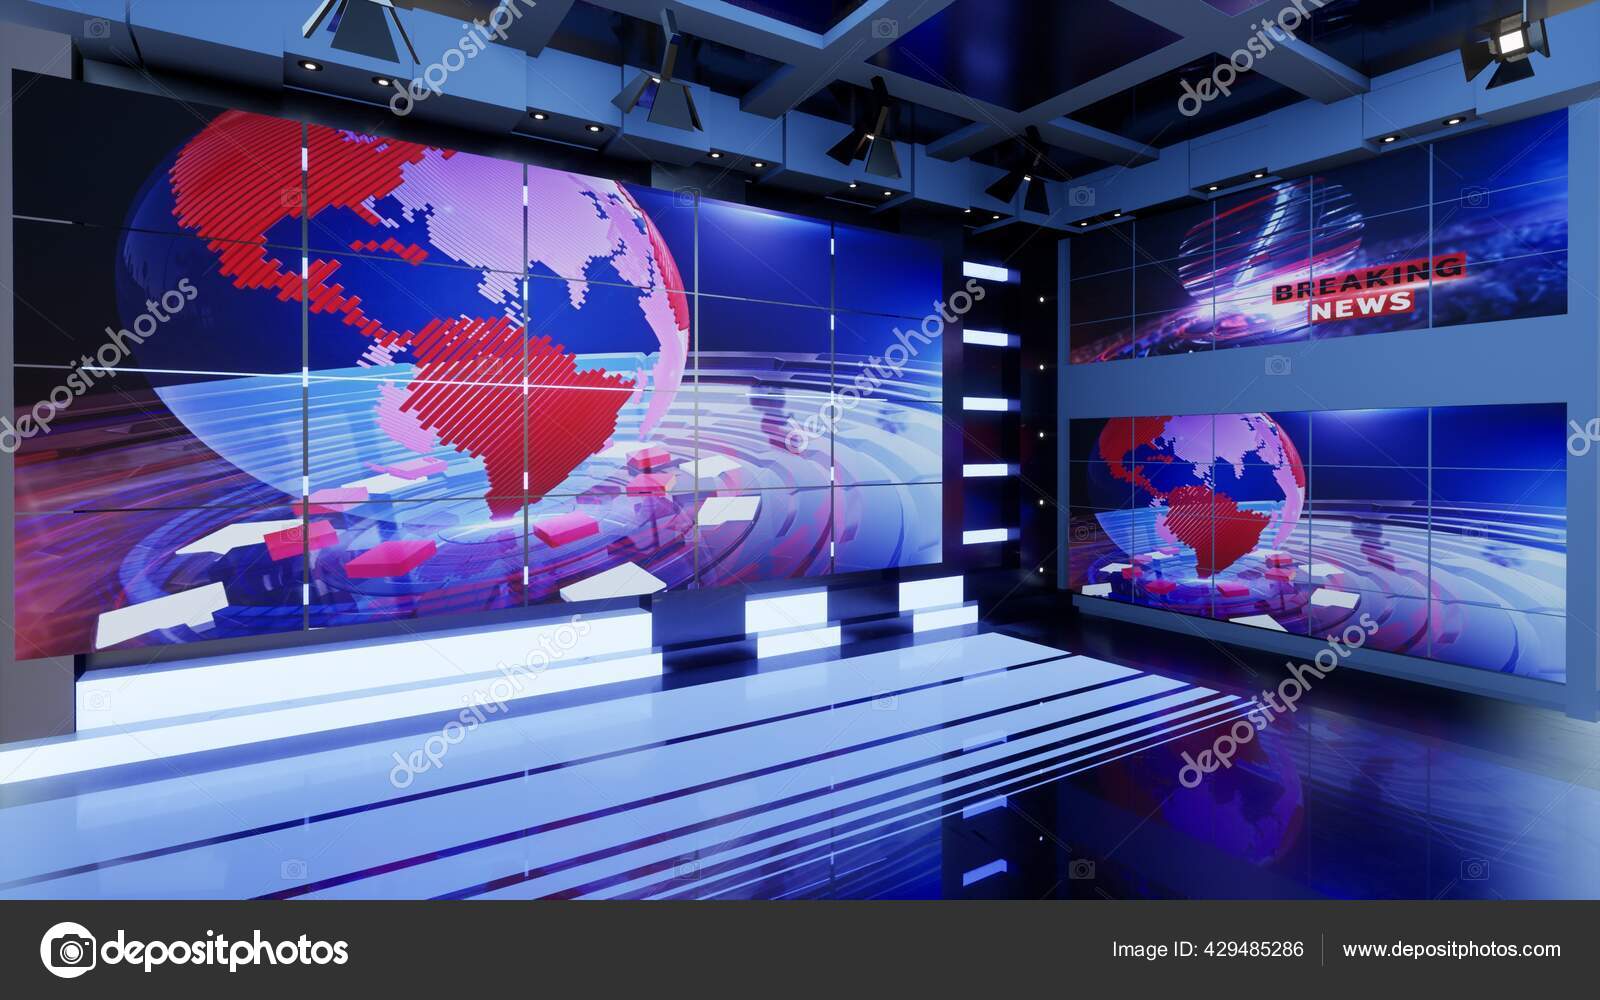 News Studio Backdrop Shows Wall Virtual News Studio Background Illustration Stock Photo By C Mus Graphic